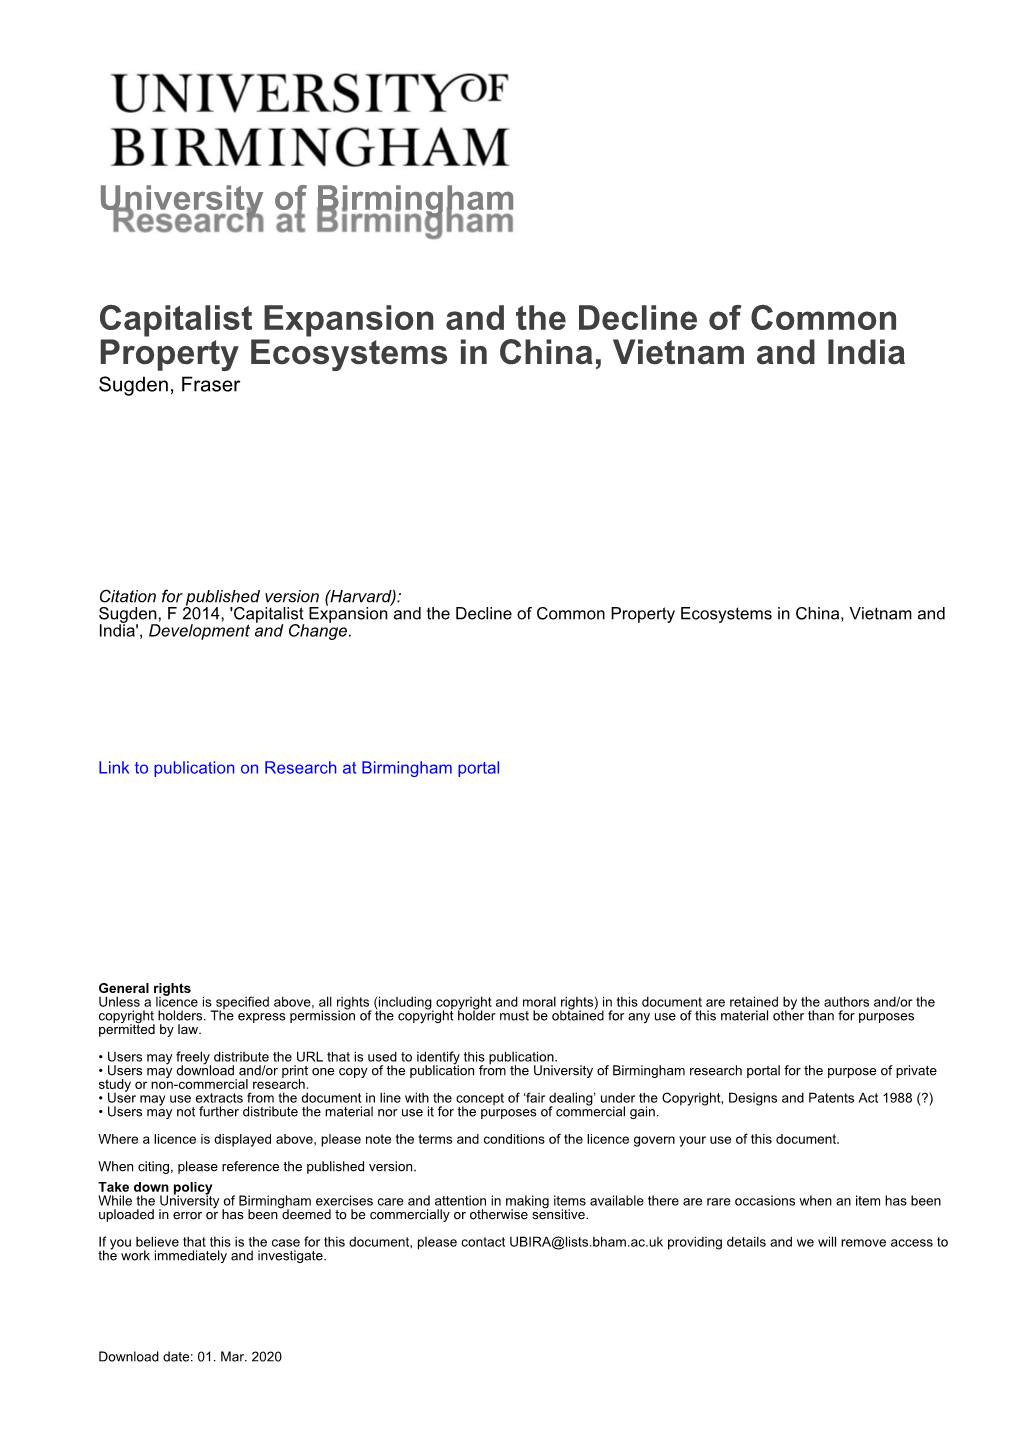 University of Birmingham Capitalist Expansion and the Decline Of